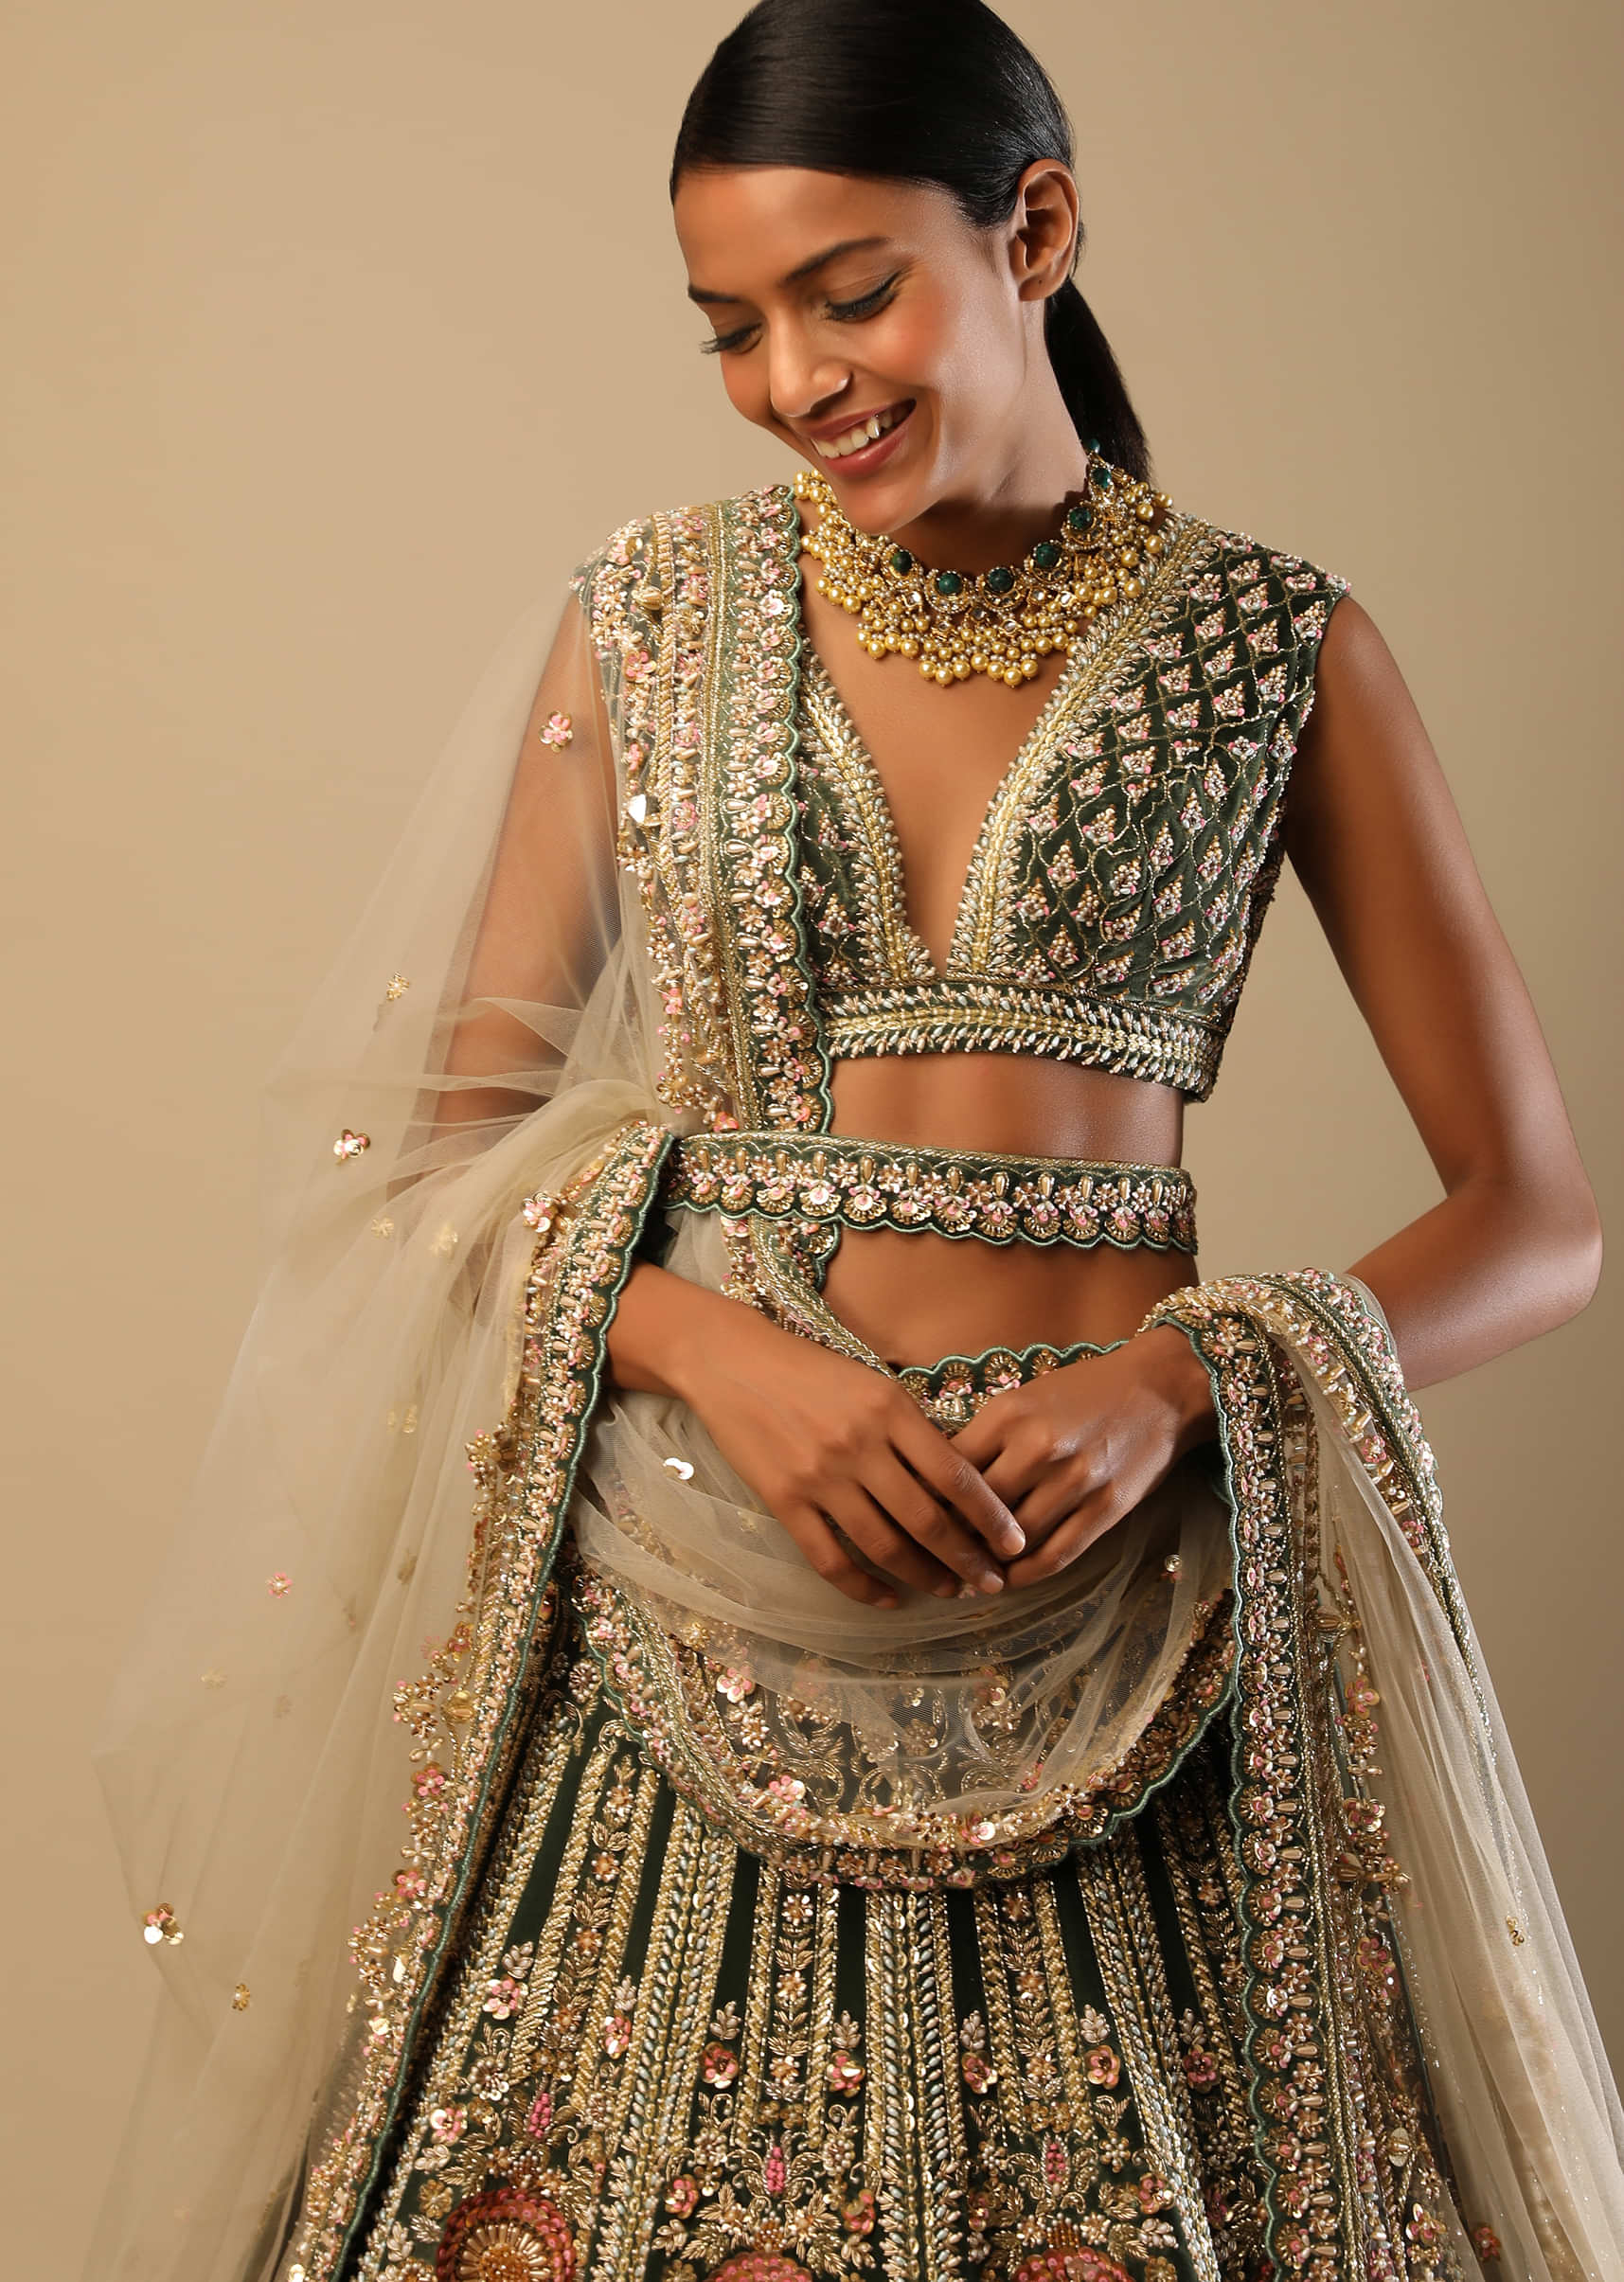 Palace Green Lehenga Choli In Velvet With Multi Colored Hand Embroidered Heritage Kalis With Hints Of Flowers 